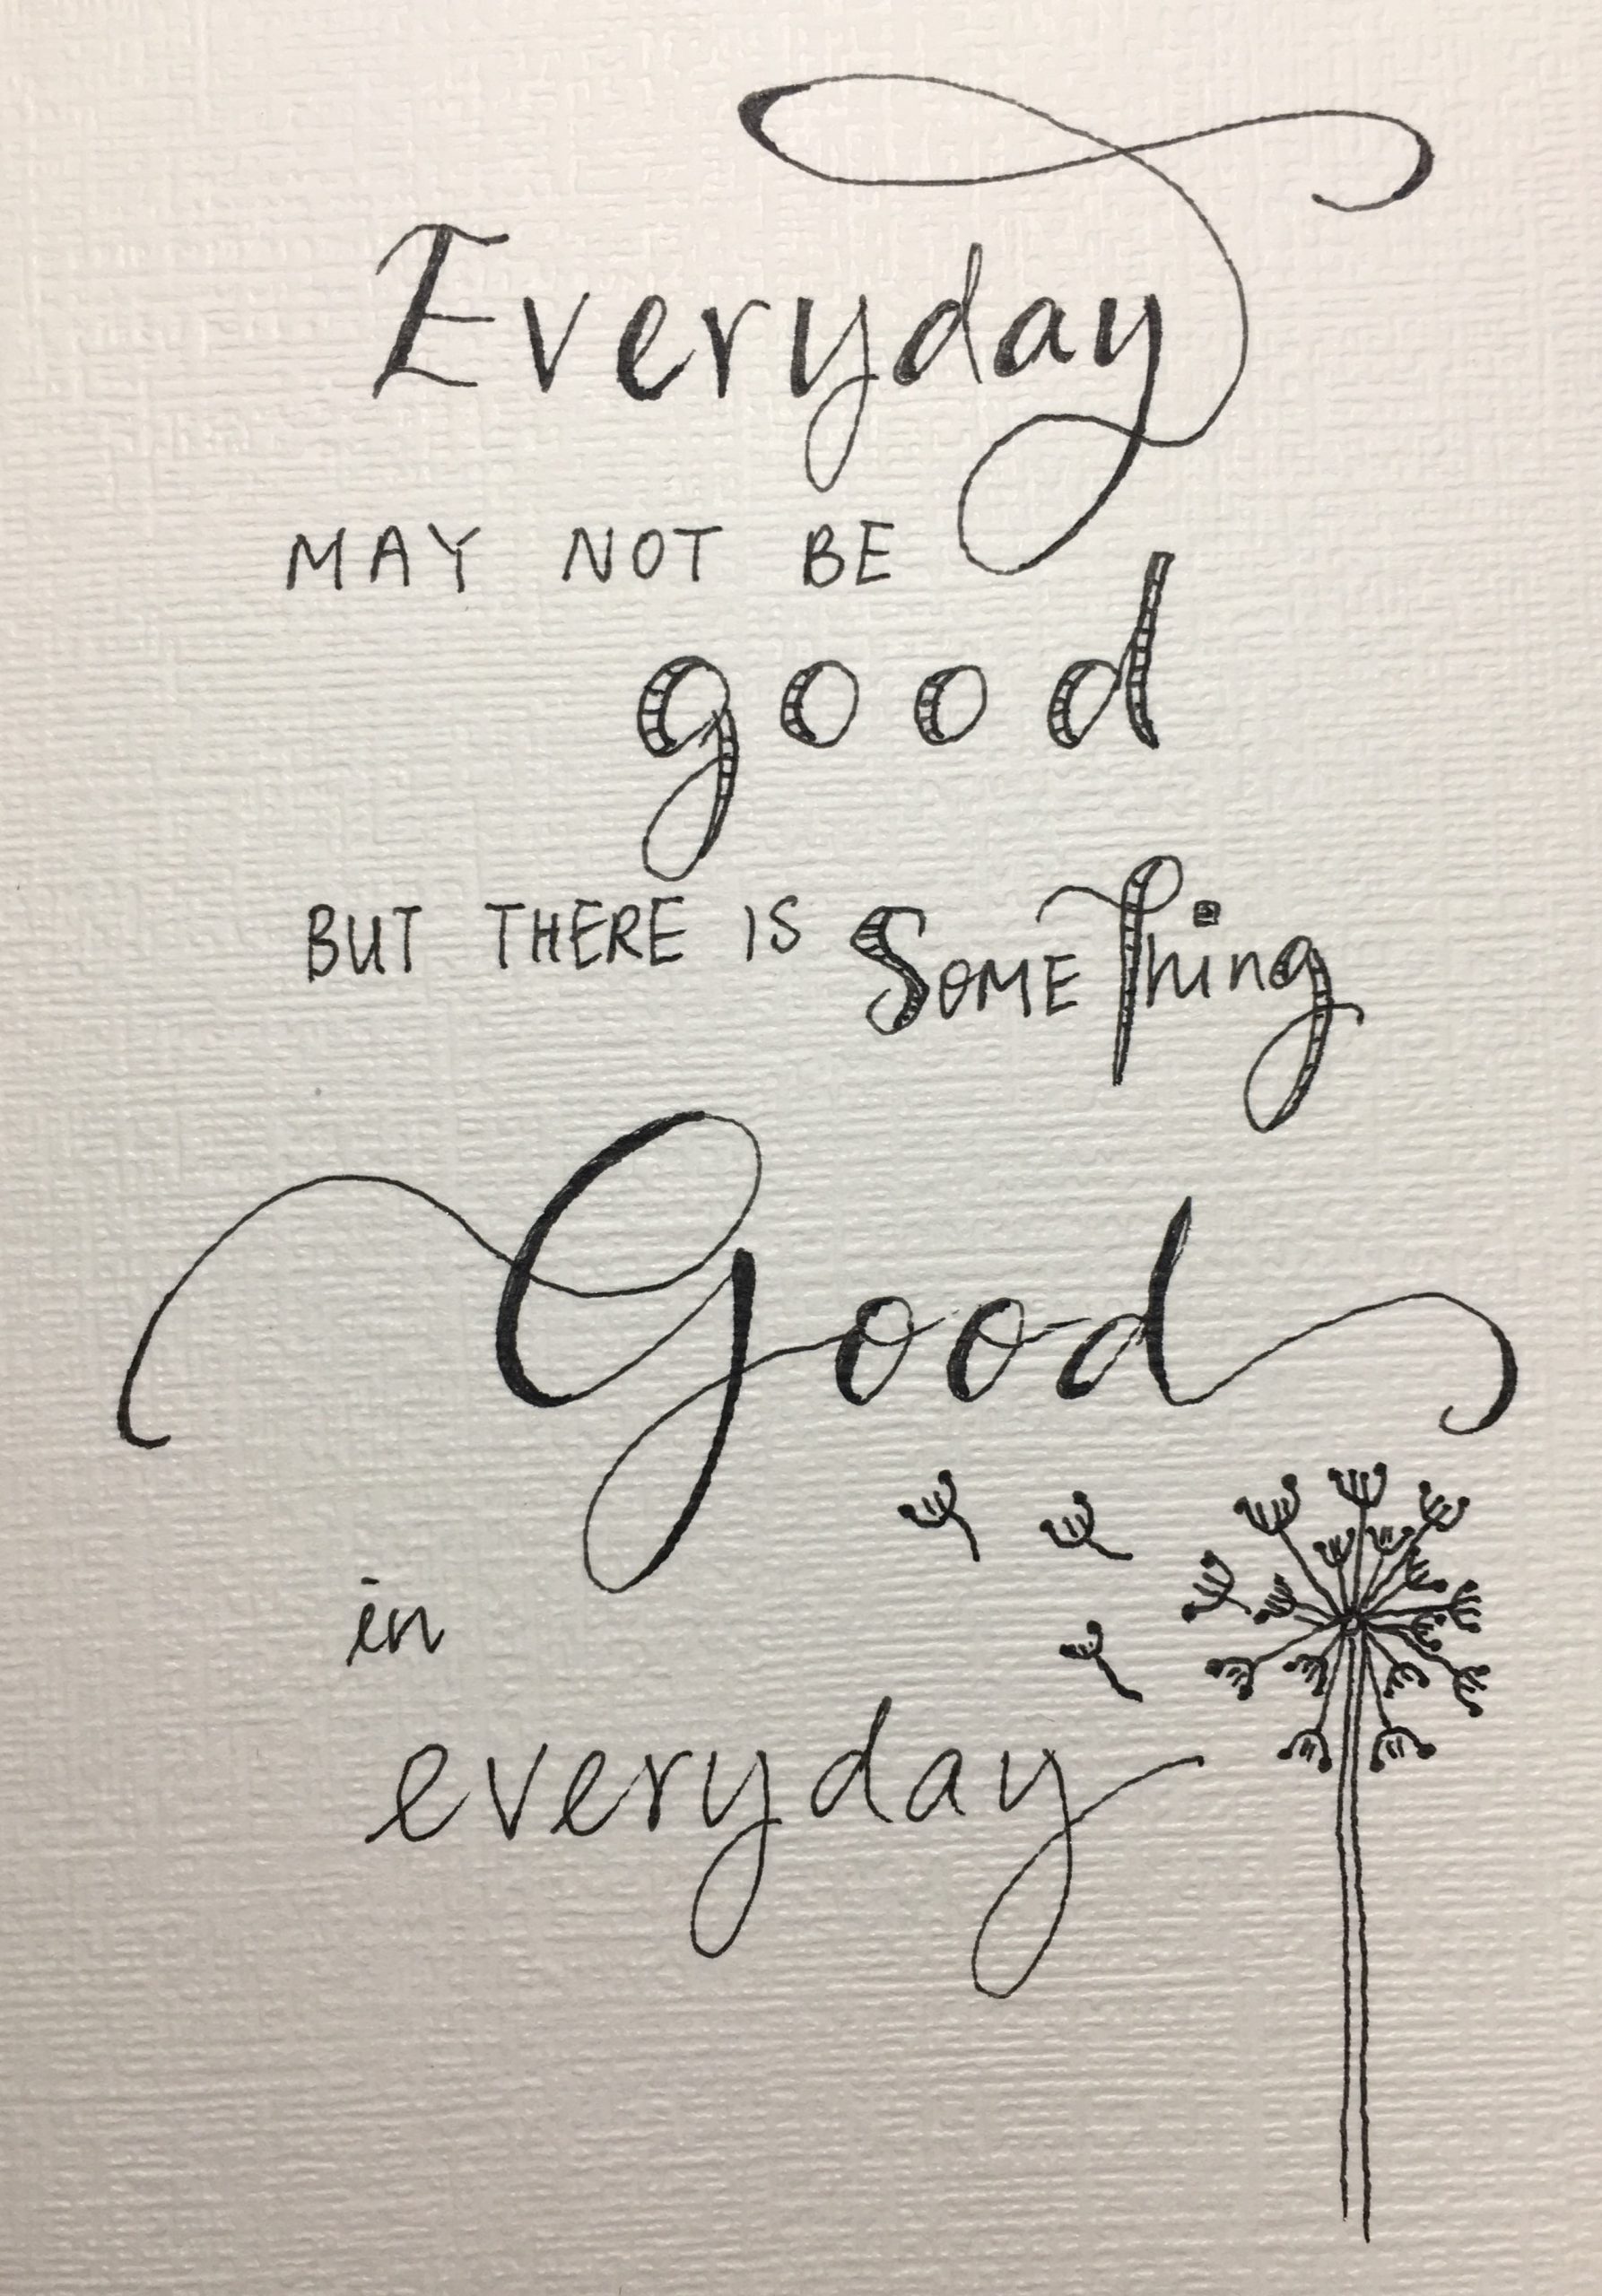 Everyday May Not Be Good But There is Something Good in Everyday